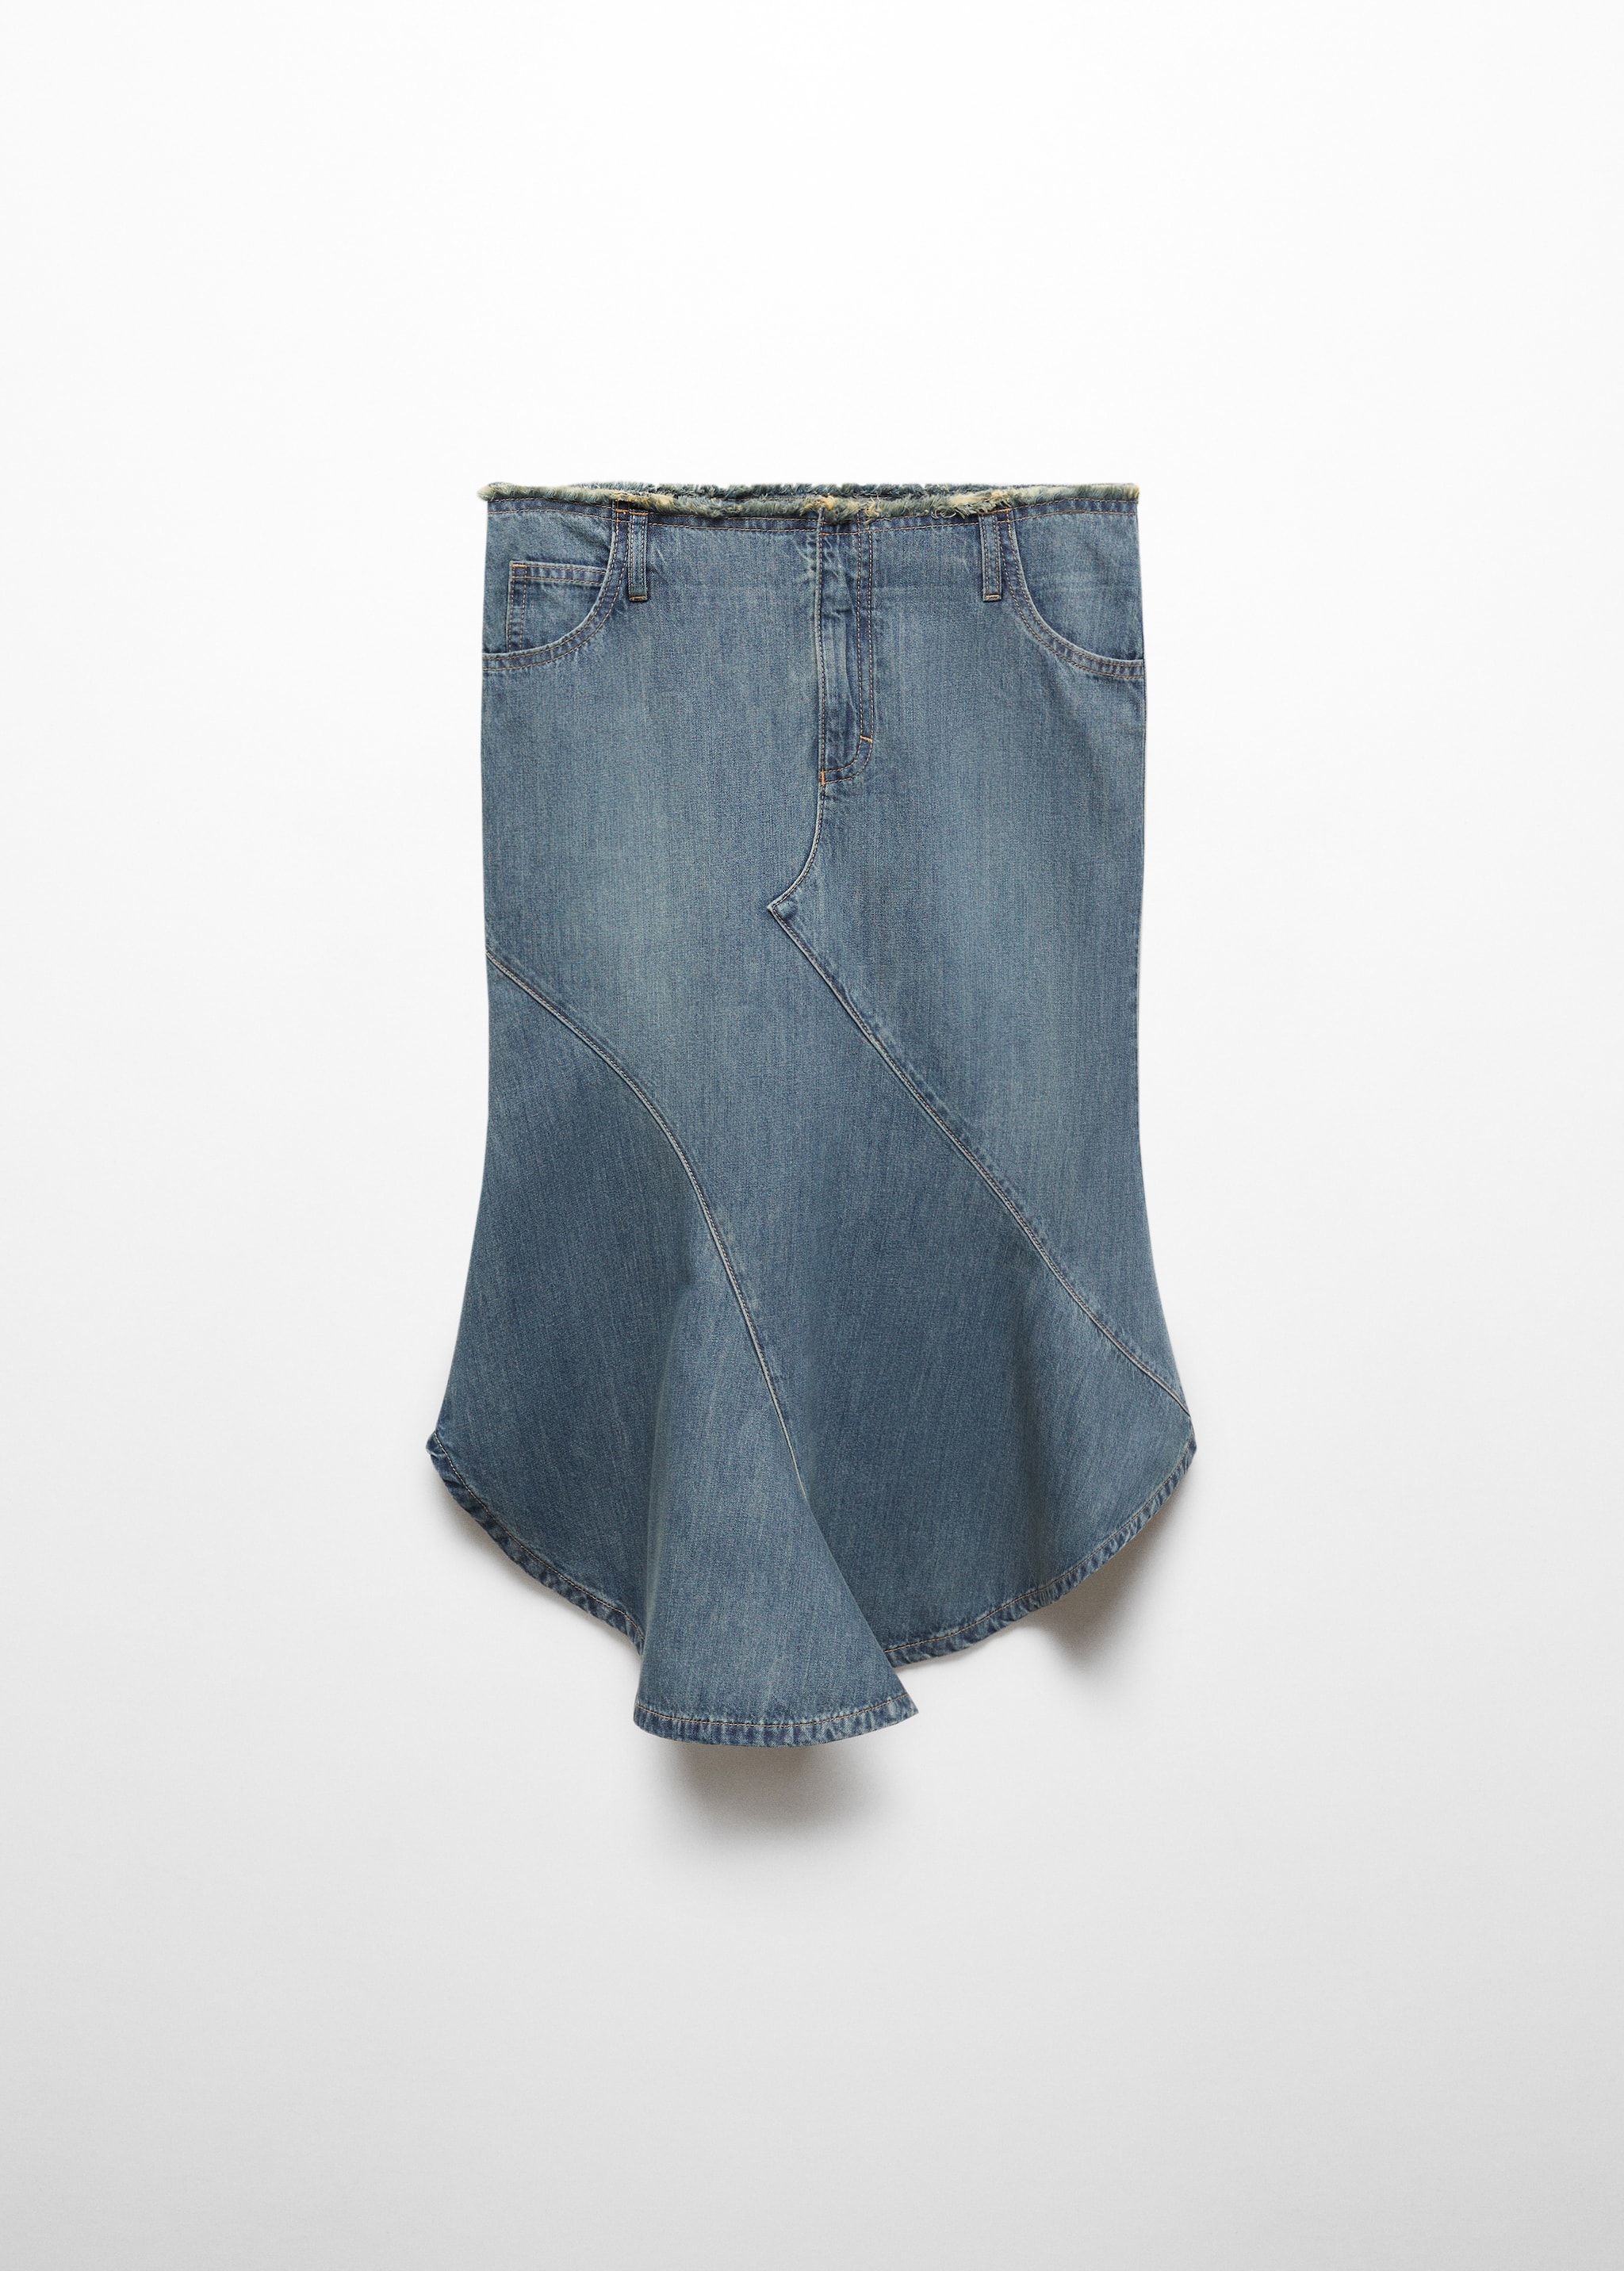 Asymmetrical frayed denim skirt - Article without model